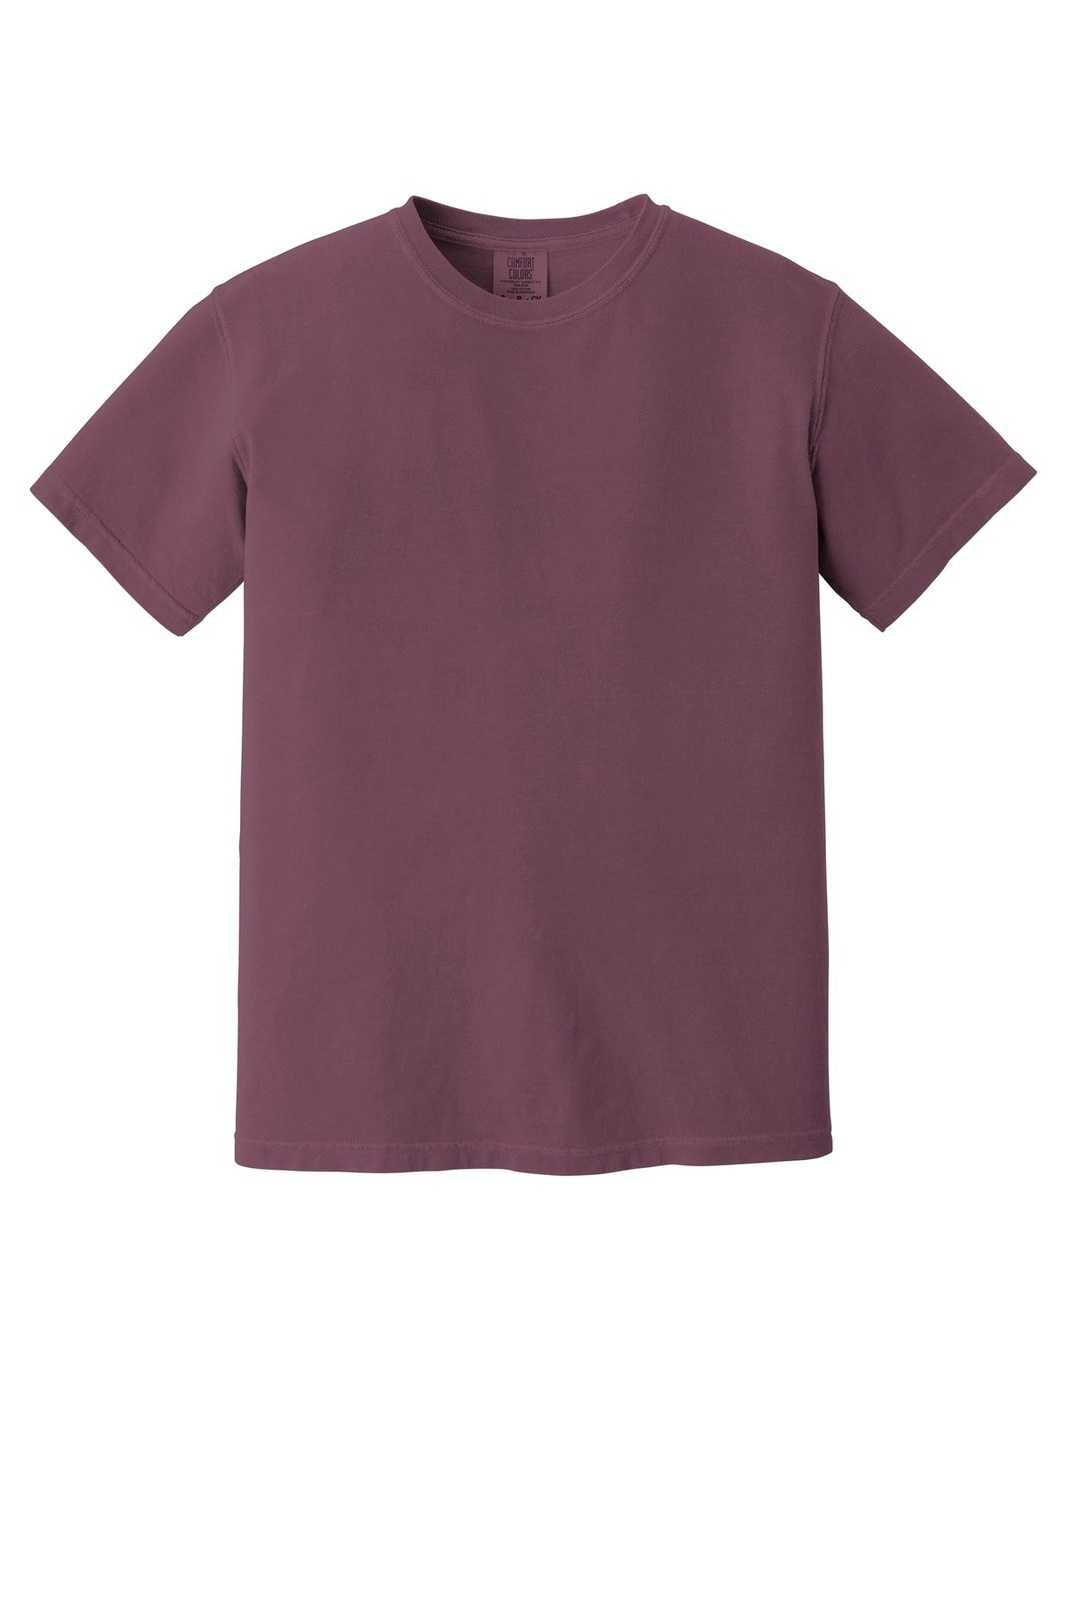 Comfort Colors 1717 Heavyweight Ring Spun Tee - Berry - HIT a Double